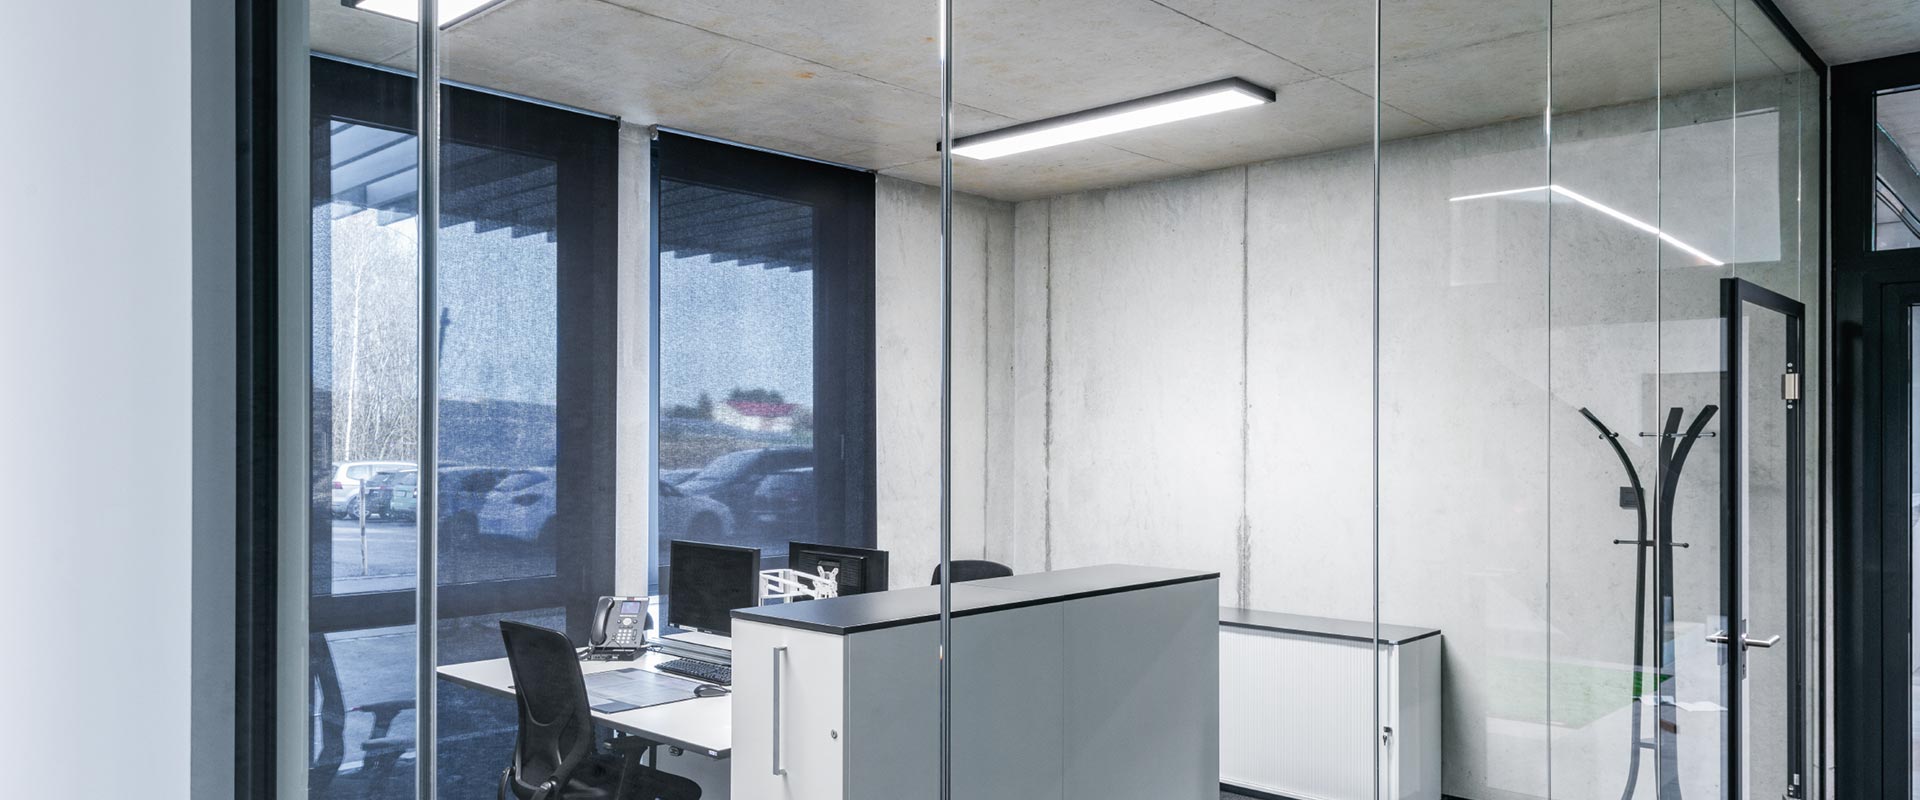 Standard-compliant LED lighting for single and double offices